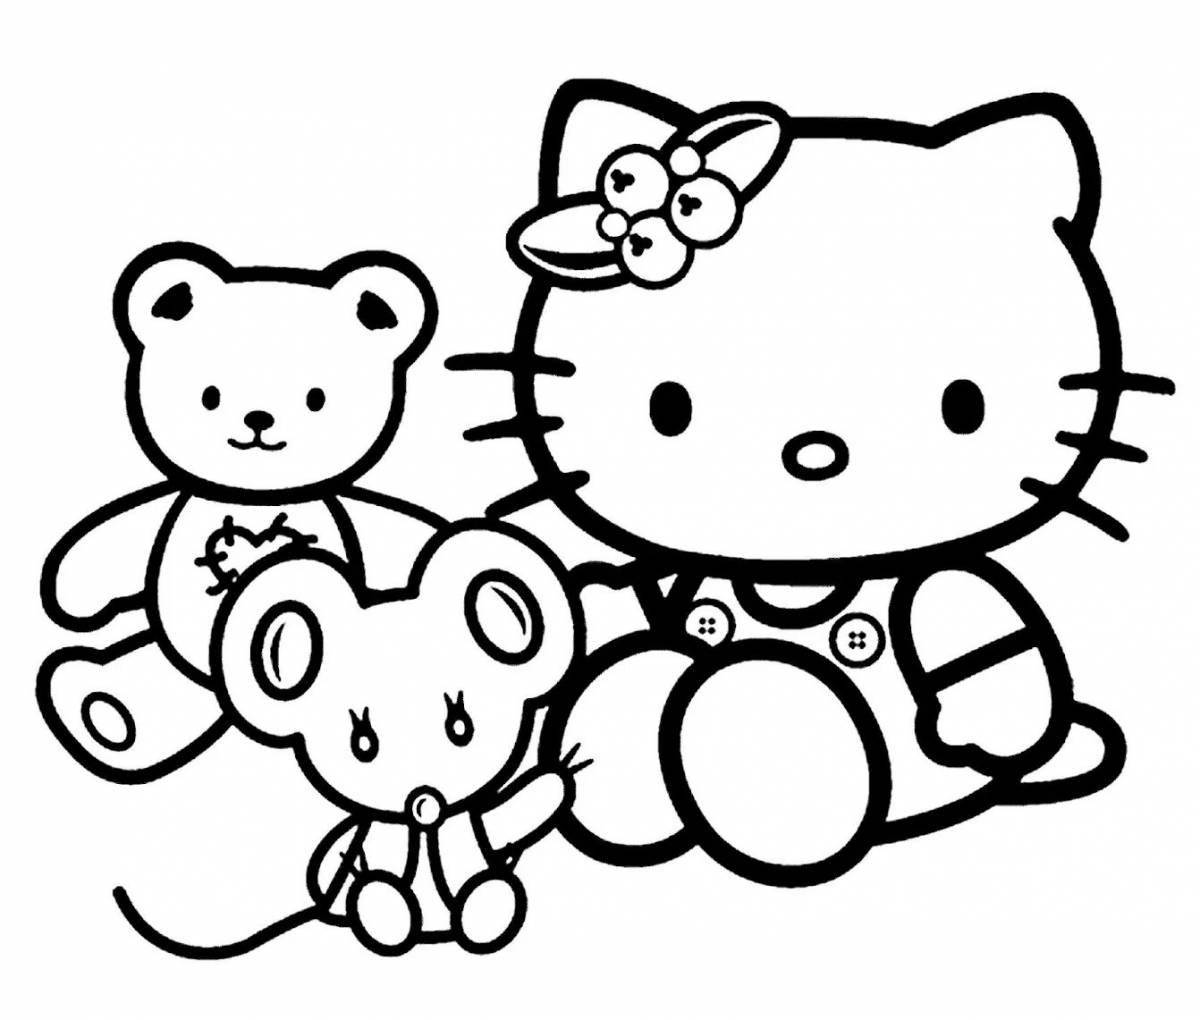 Colorful hello coloring page